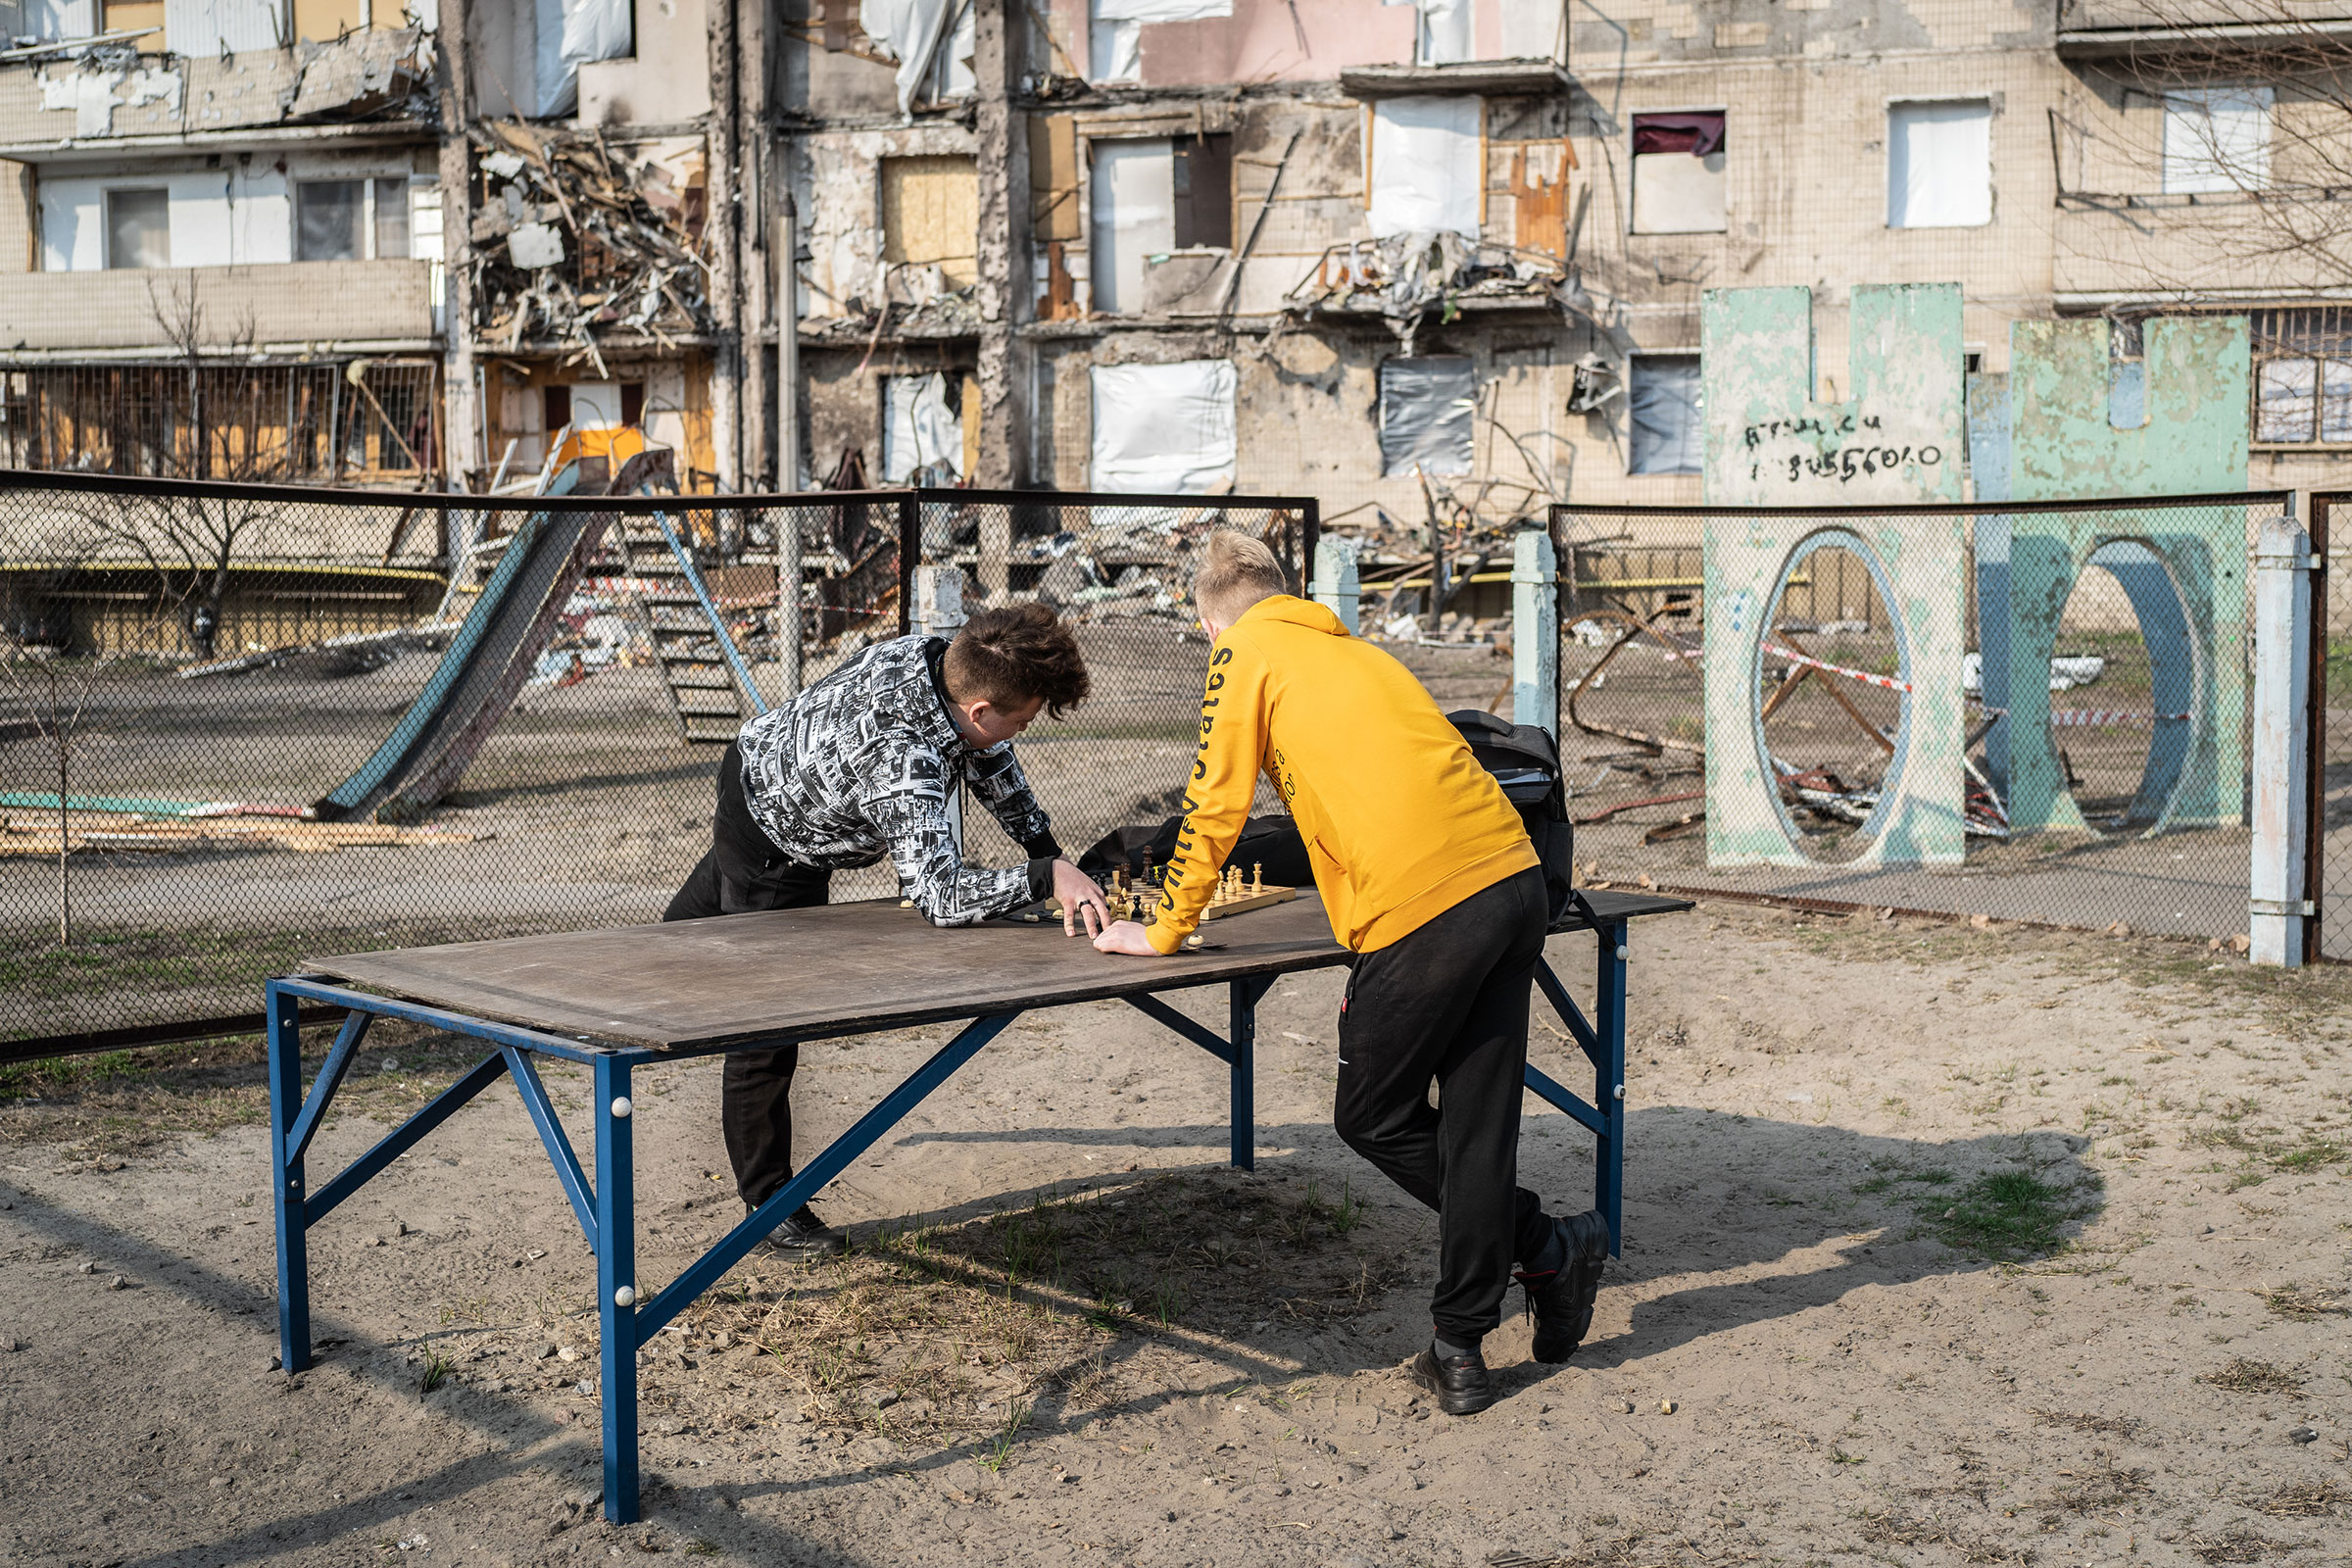 Sasha and Anton, both 15, play chess near a ruined building in Kyiv on March 24. (Serhii Korovainyi)